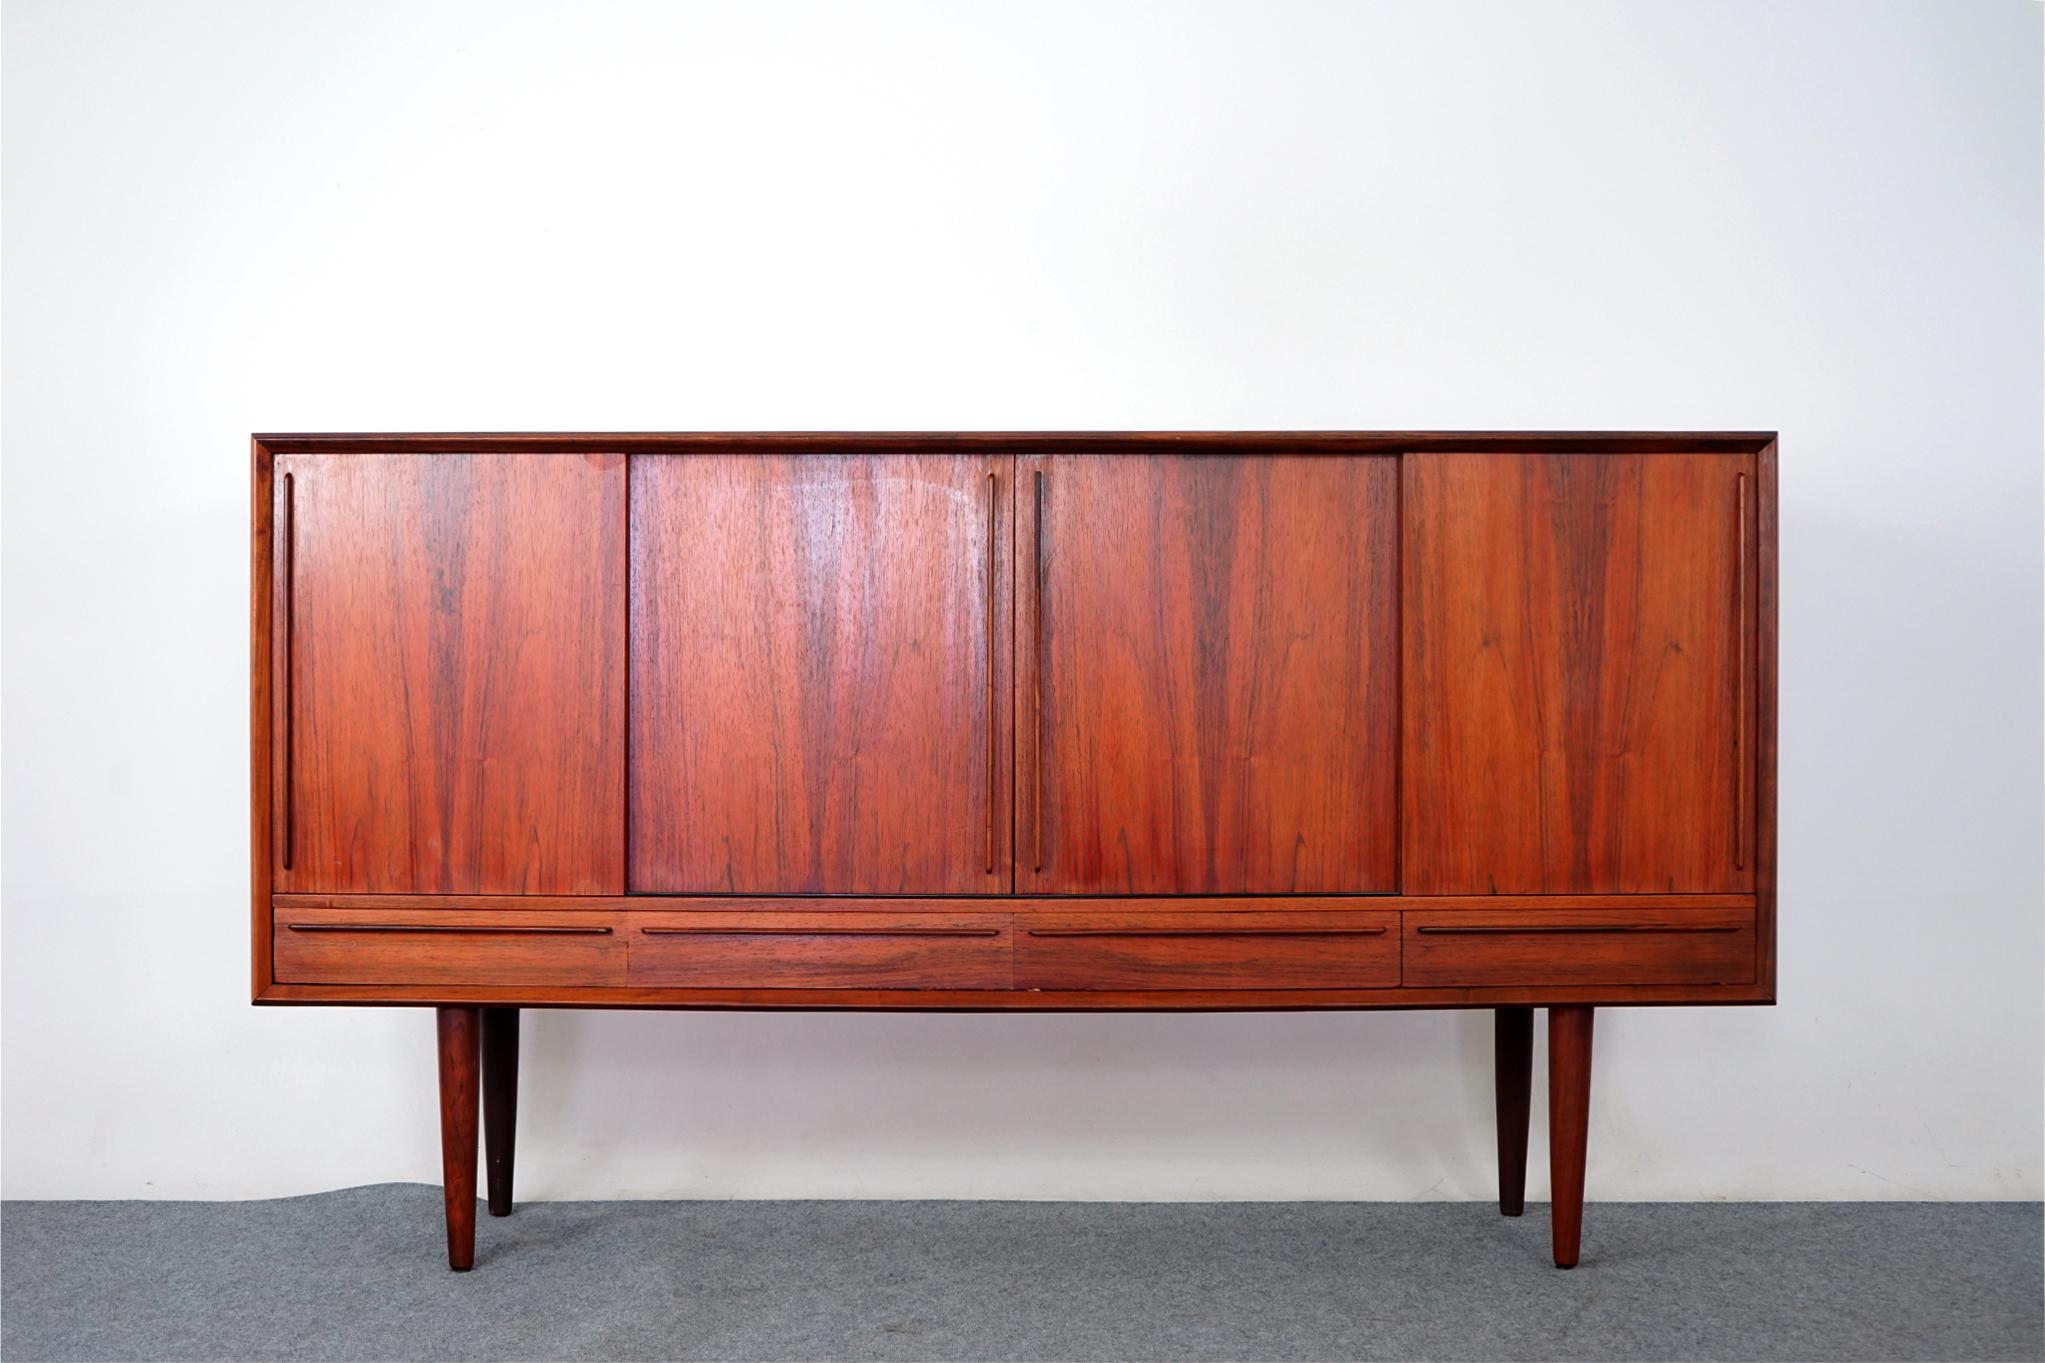 Rosewood Danish modern sideboard, circa 1960's. Gorgeous bow front with generous solid edge trim makes this piece a stand out! Clean, simple, graceful lines highlight the exceptional book-matched veneer doors. Interior compartments showcase 5